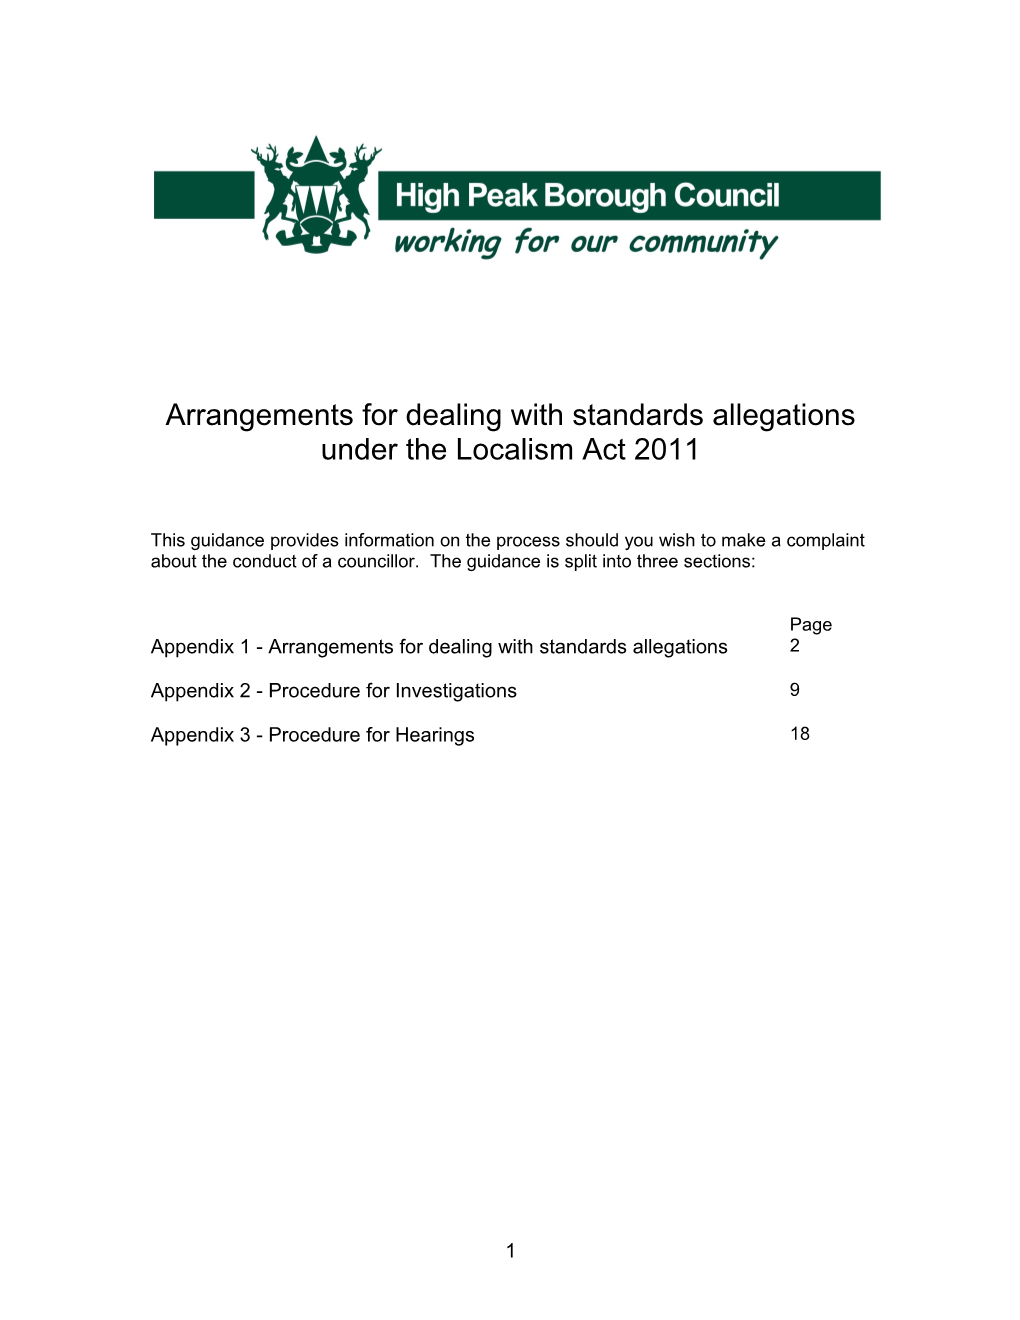 Arrangementsfor Dealing with Standards Allegations Under the Localism Act 2011